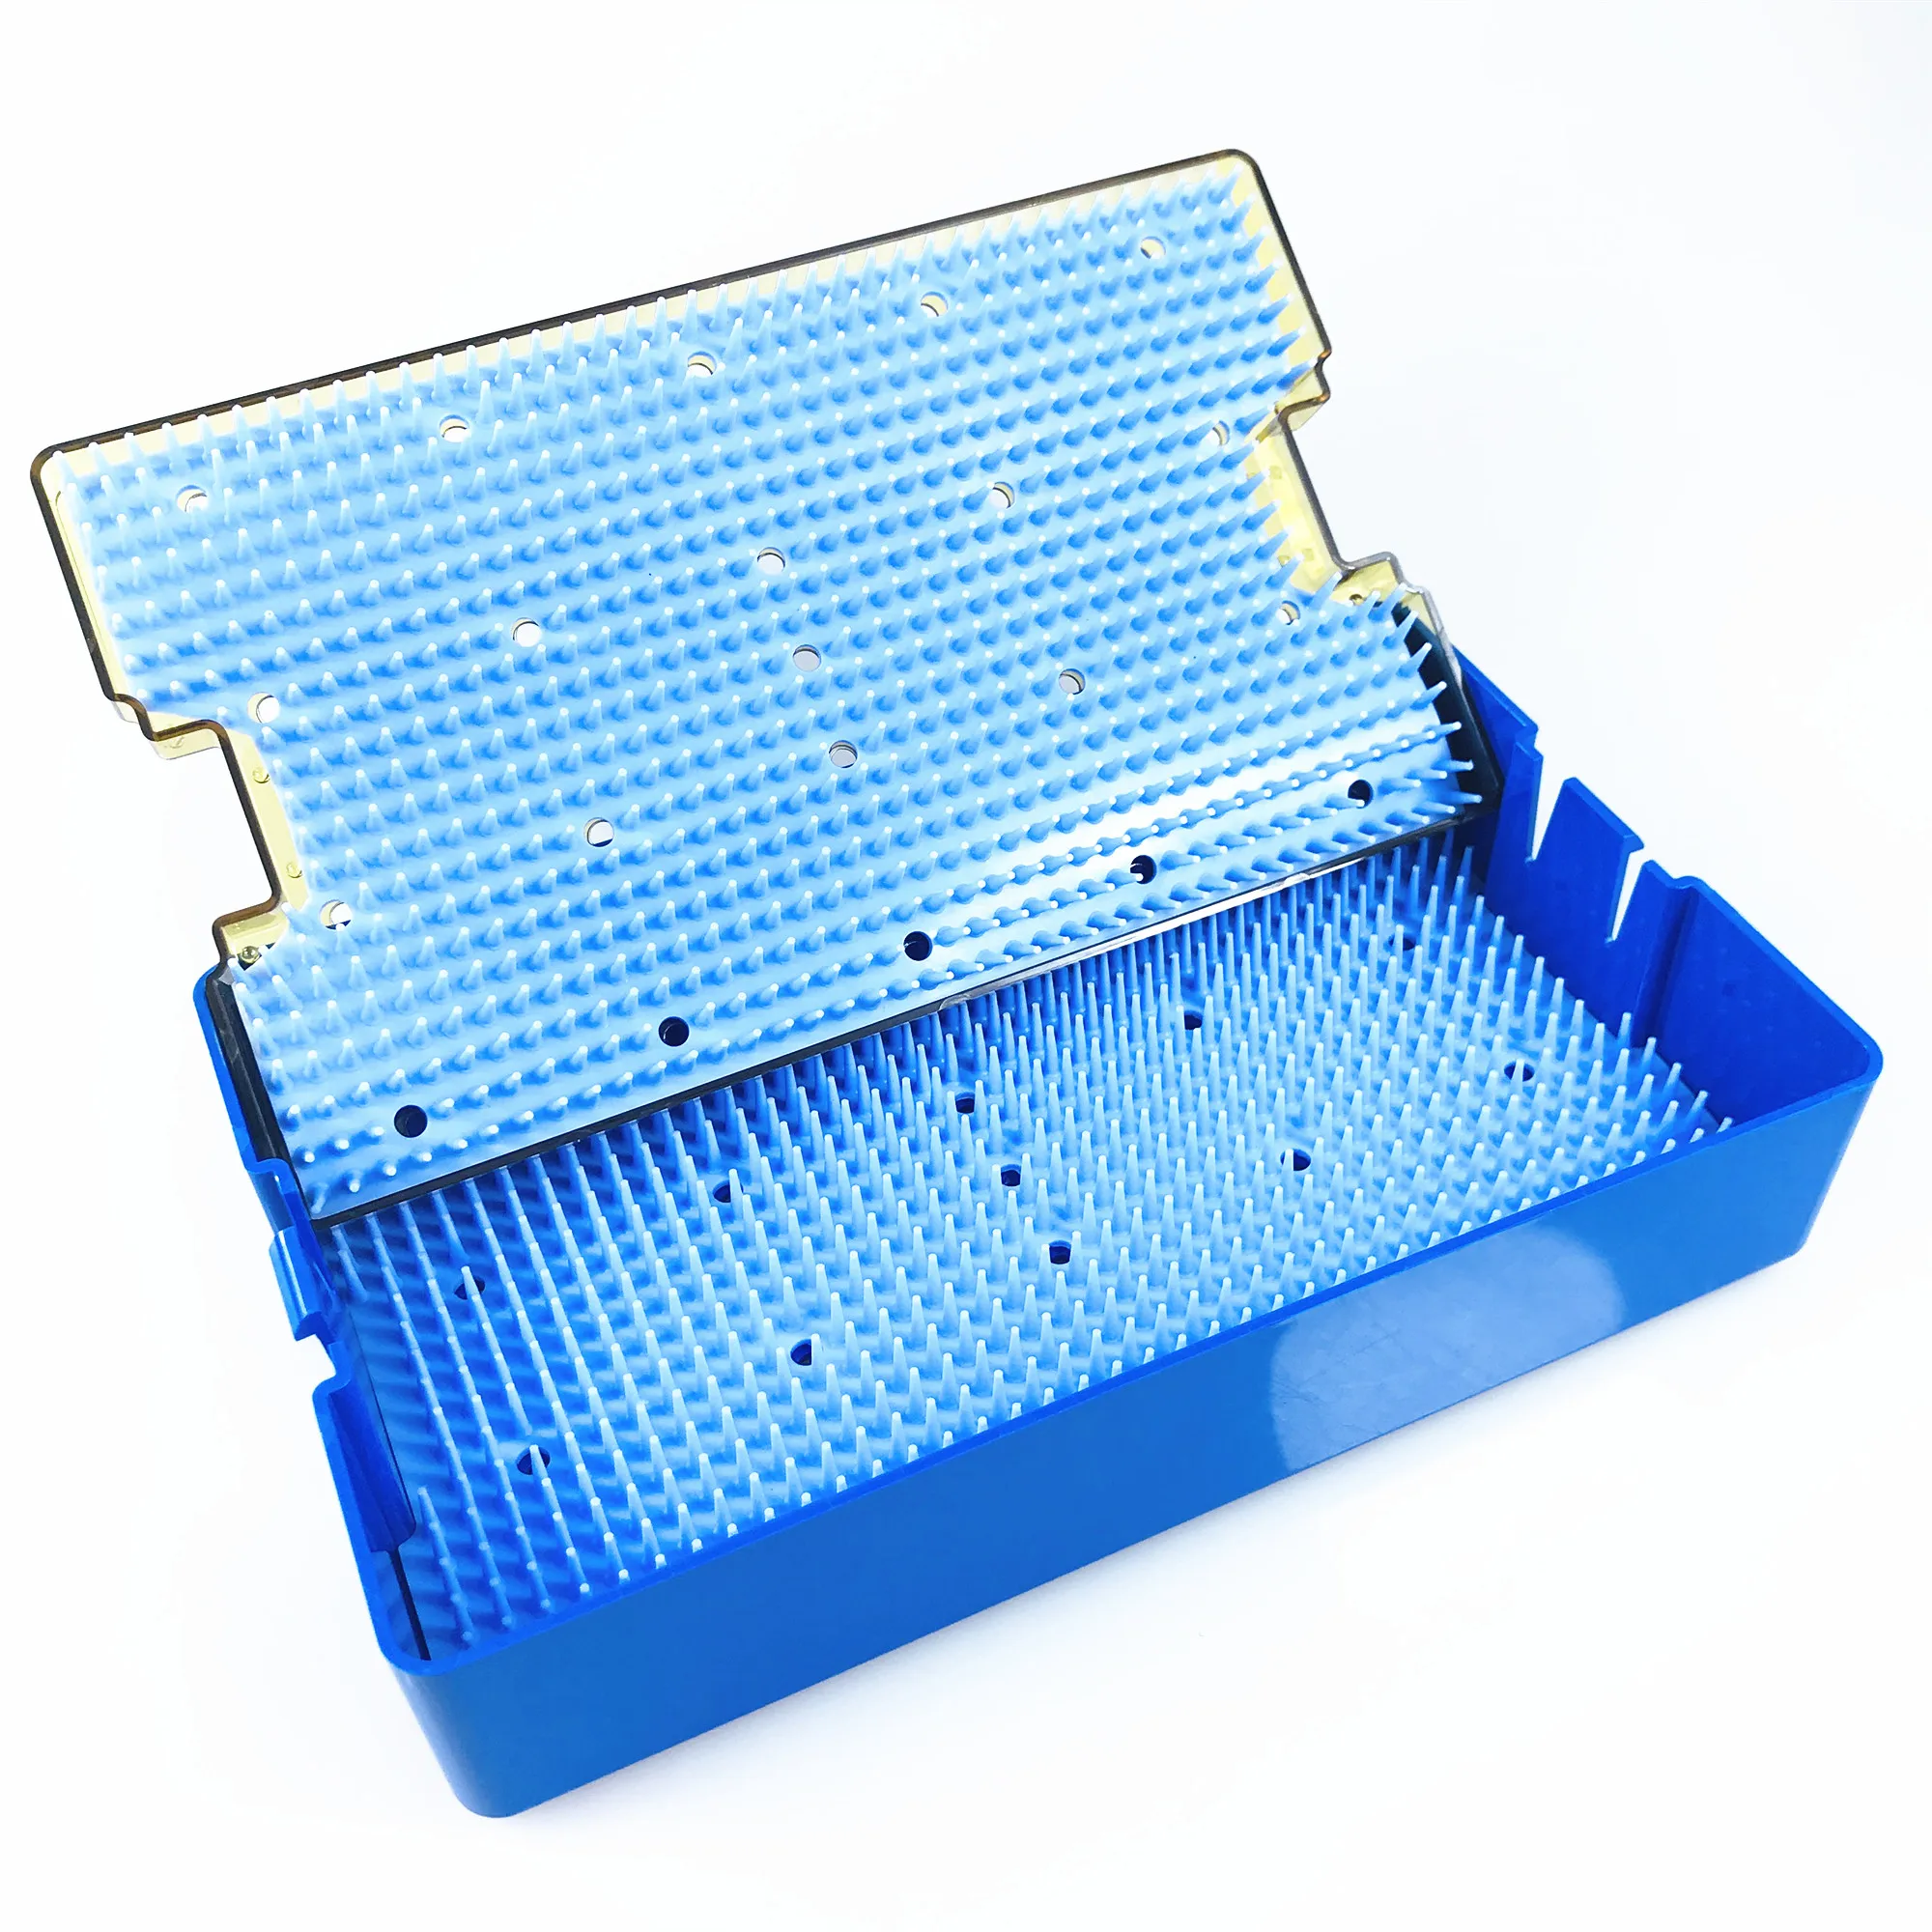 double-level-sterilization-tray-box-case-dental-disinfection-box-for-holding-instrument-autoclavable